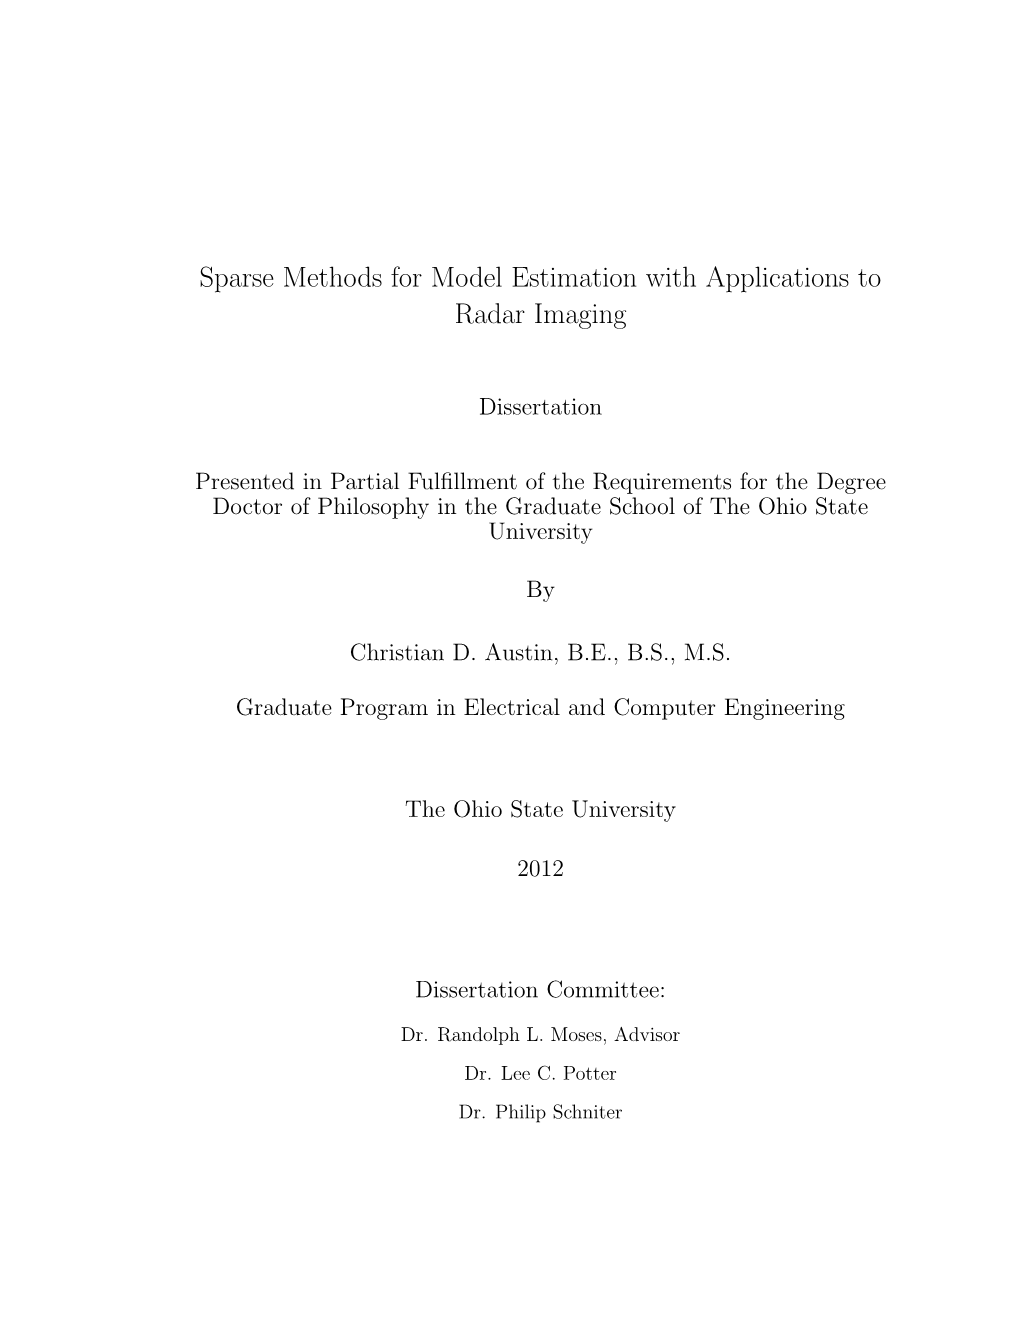 Sparse Methods for Model Estimation with Applications to Radar Imaging